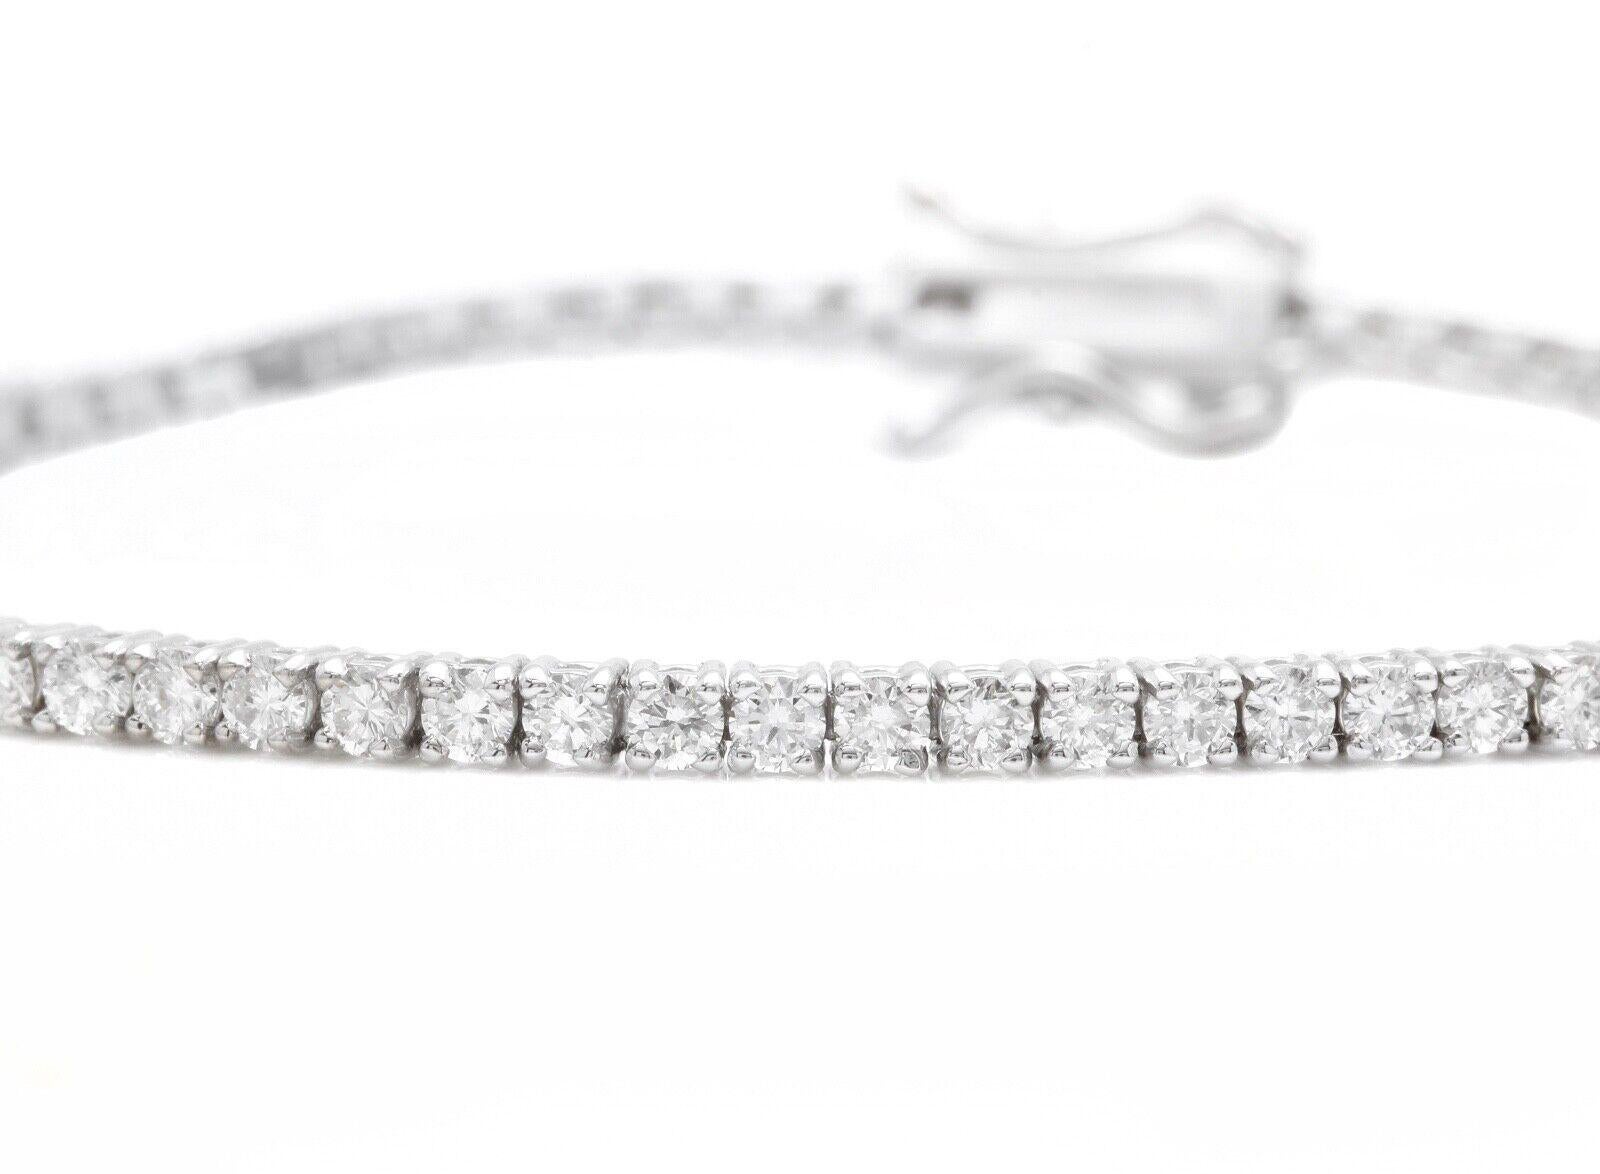 1.20 Carats Stunning Natural Diamond 14K Solid White Gold Bracelet 

Suggested Replacement Value: Approx. $5,500.00

STAMPED: 14K

Total Natural Round Diamonds Weight: Approx. 1.20 Carats (color G-H / Clarity SI)

Bangle Wrist Size is:  7